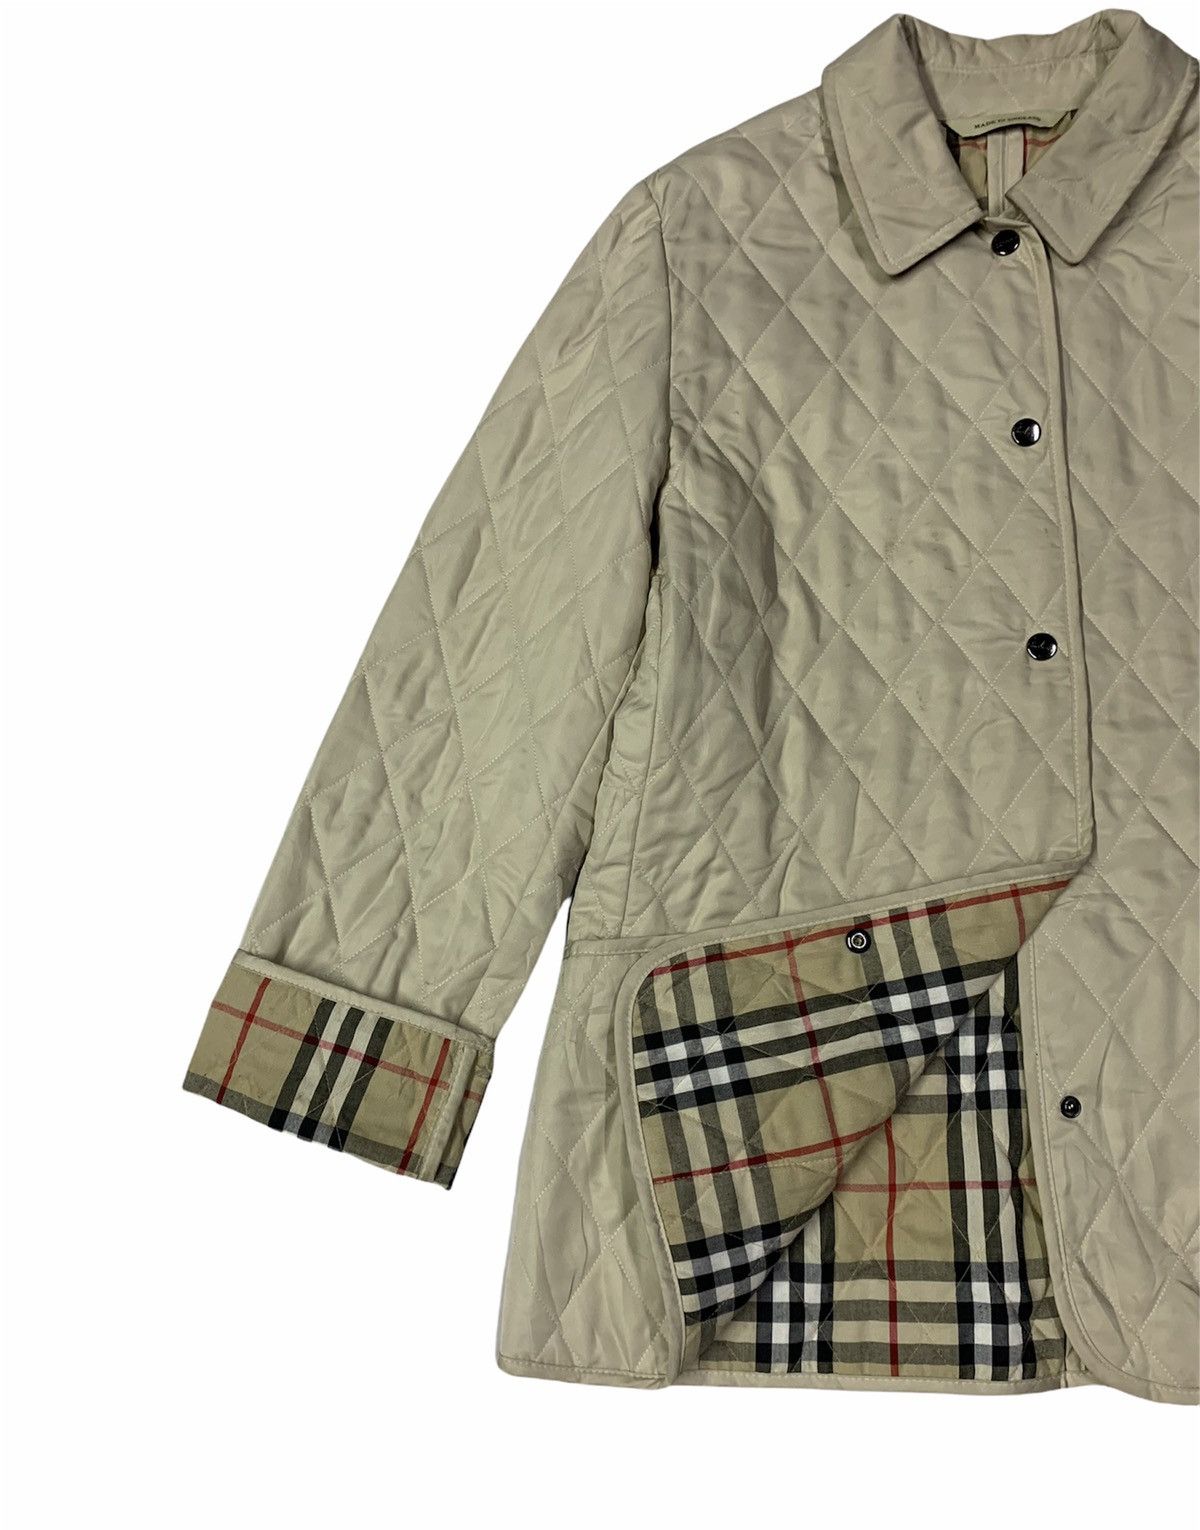 🔥BURBERRY QUILTED JACKETS NOVACHECK - 4